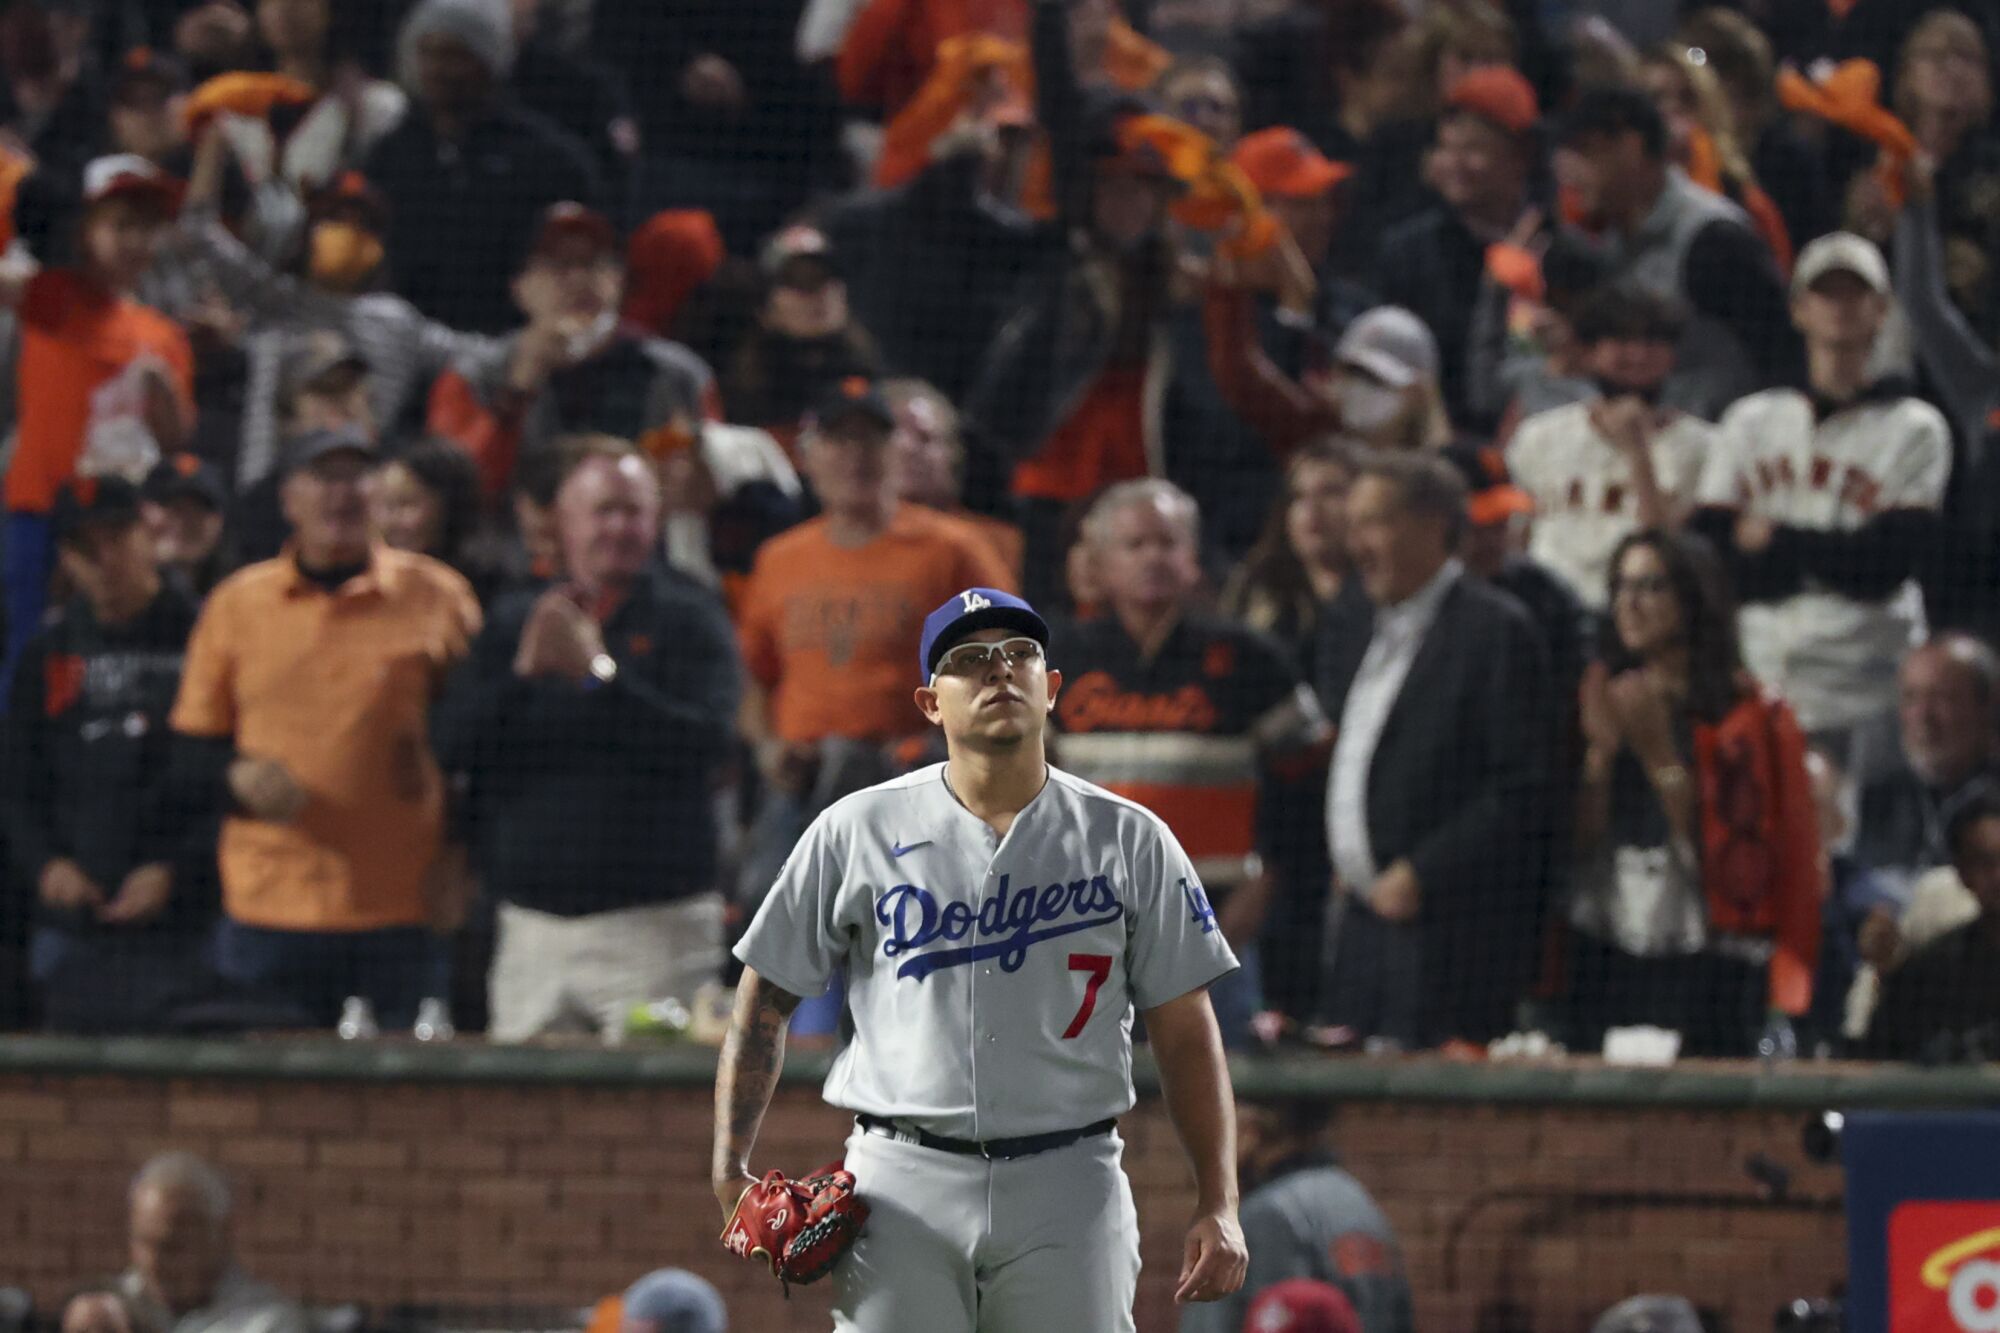 Dodgers pitcher Julio Urias looks up after allowing a base hit to Giants' Brandon Crawford